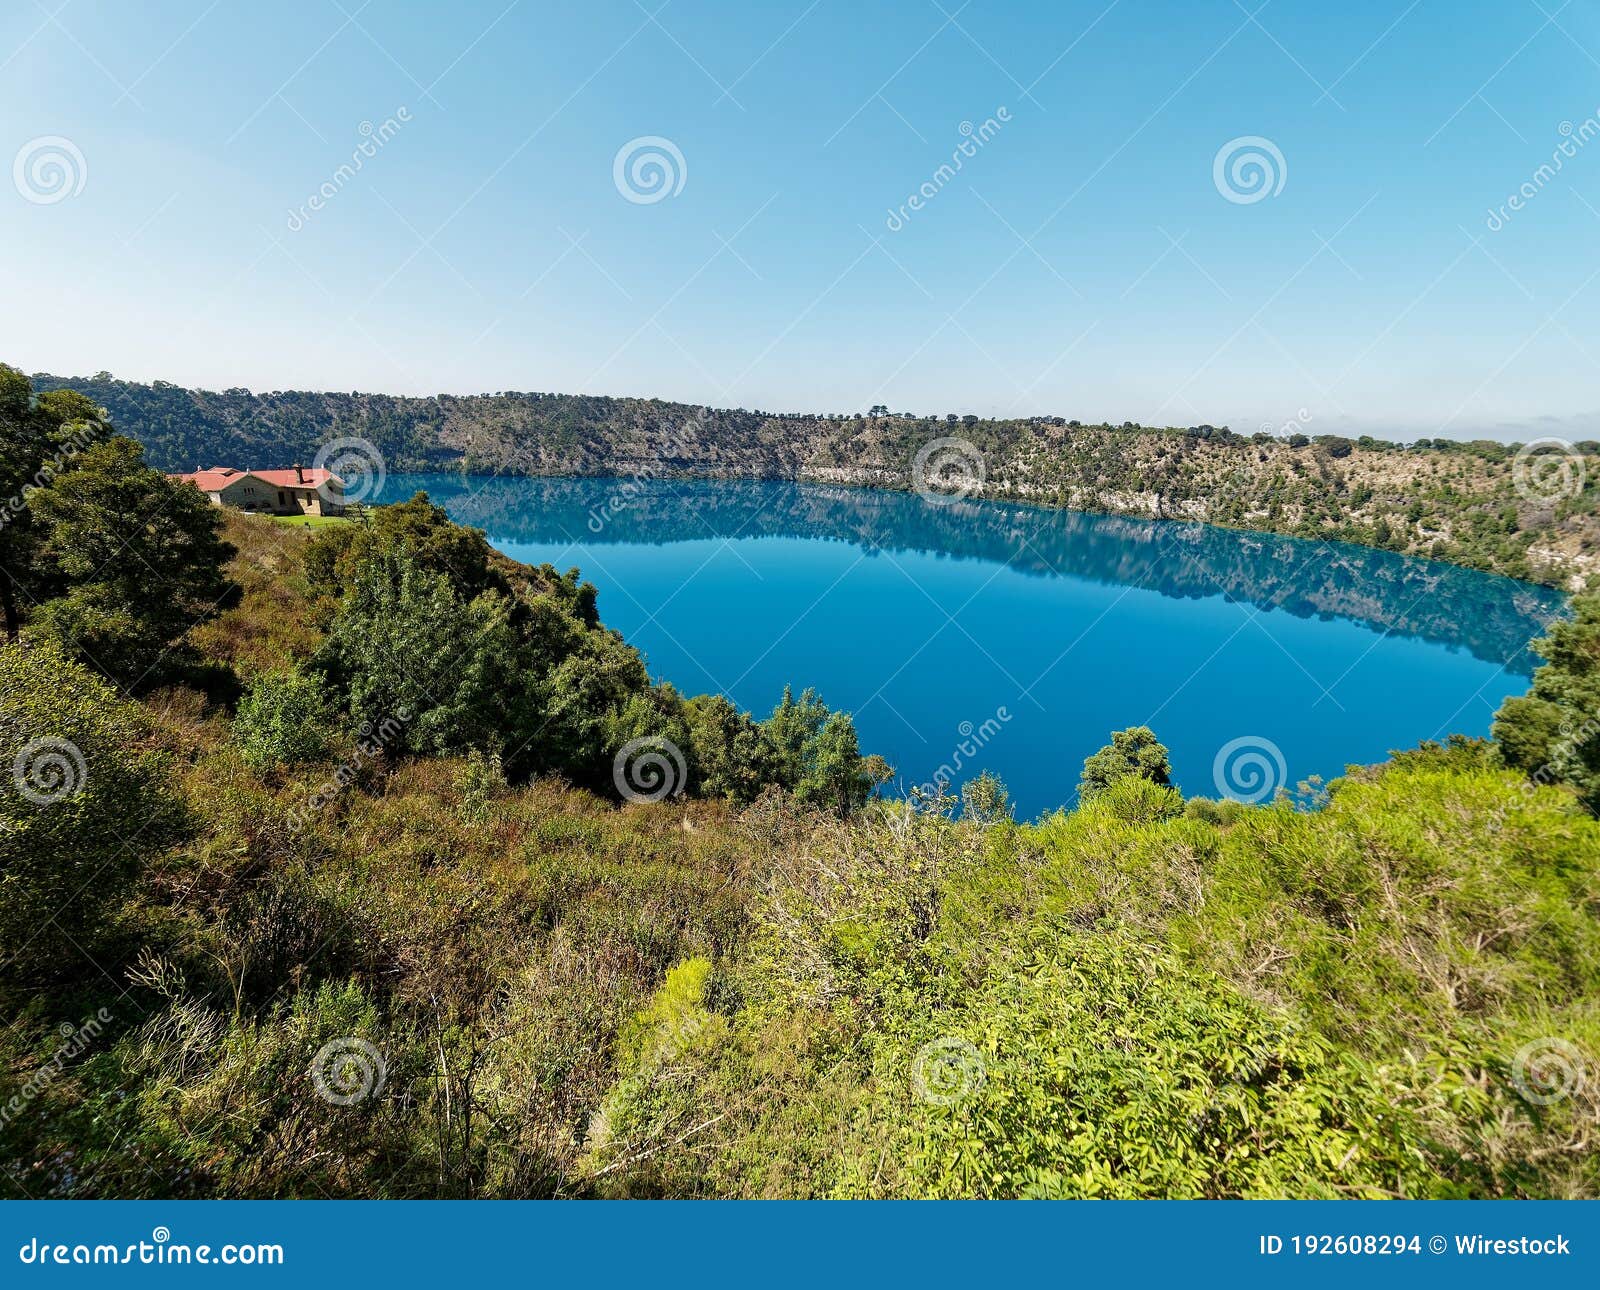 blue lake volcano crater.